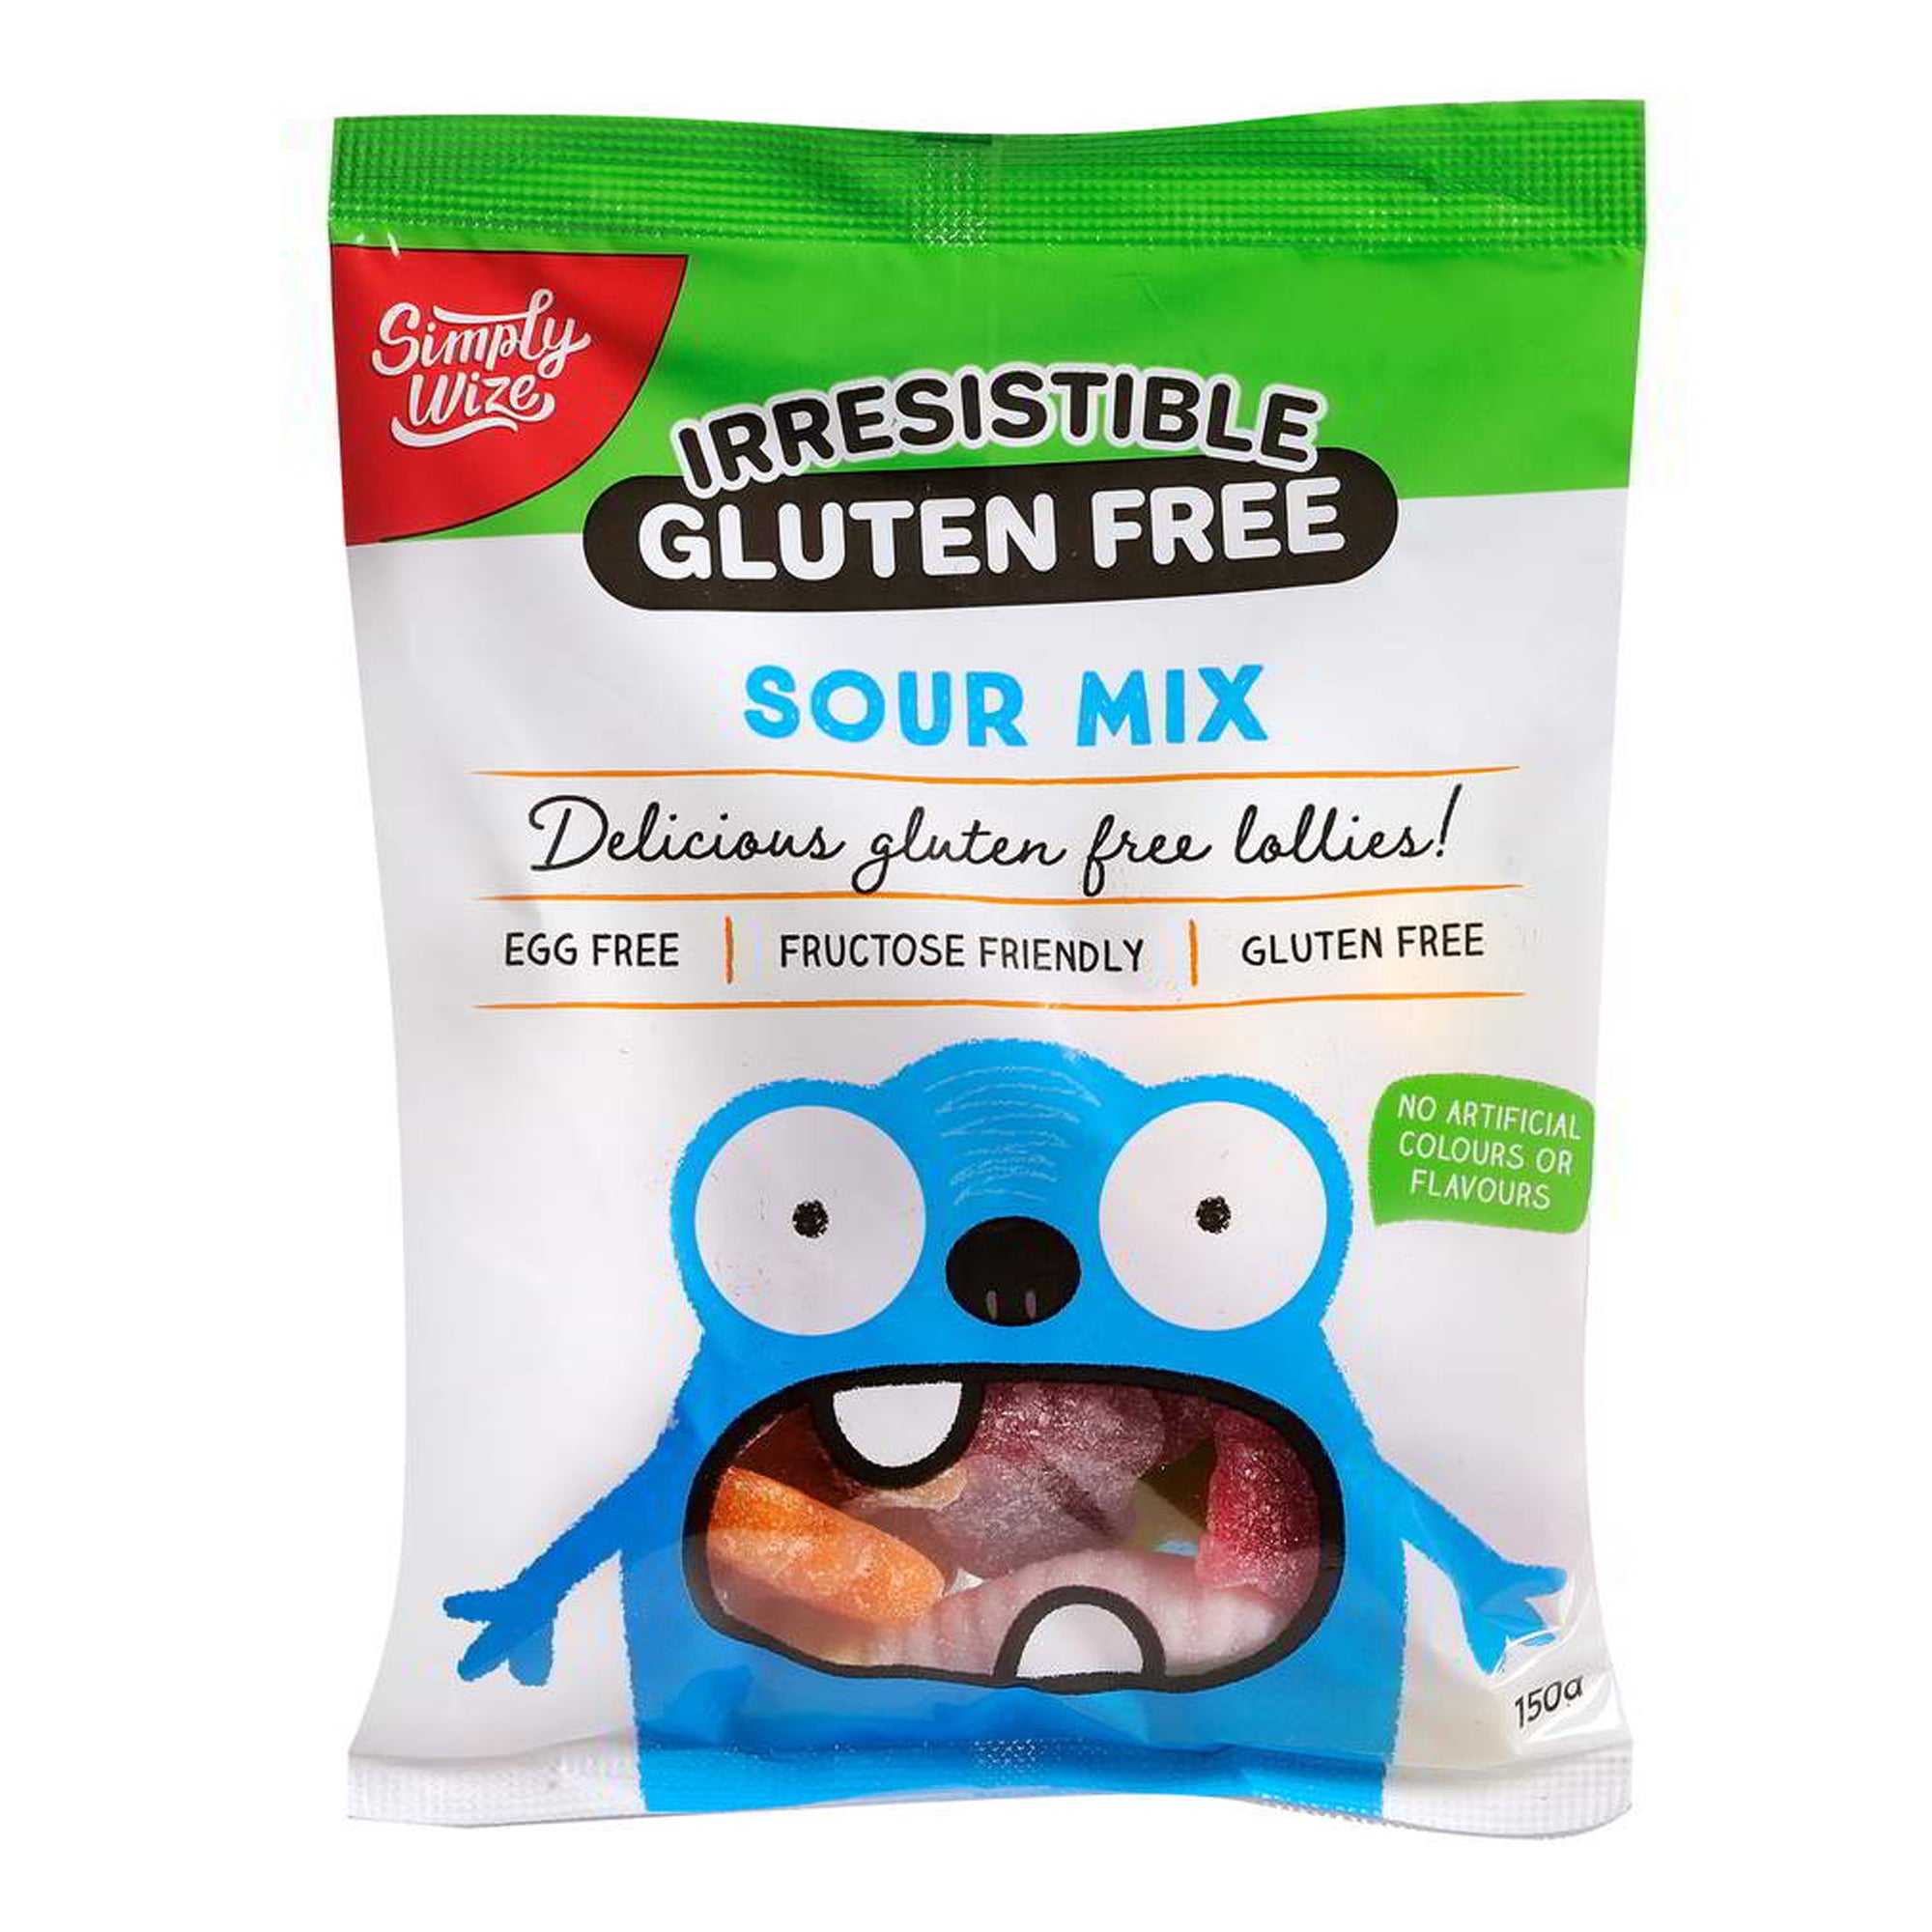 Simply Wize - Irresistible Sour Mix 150g